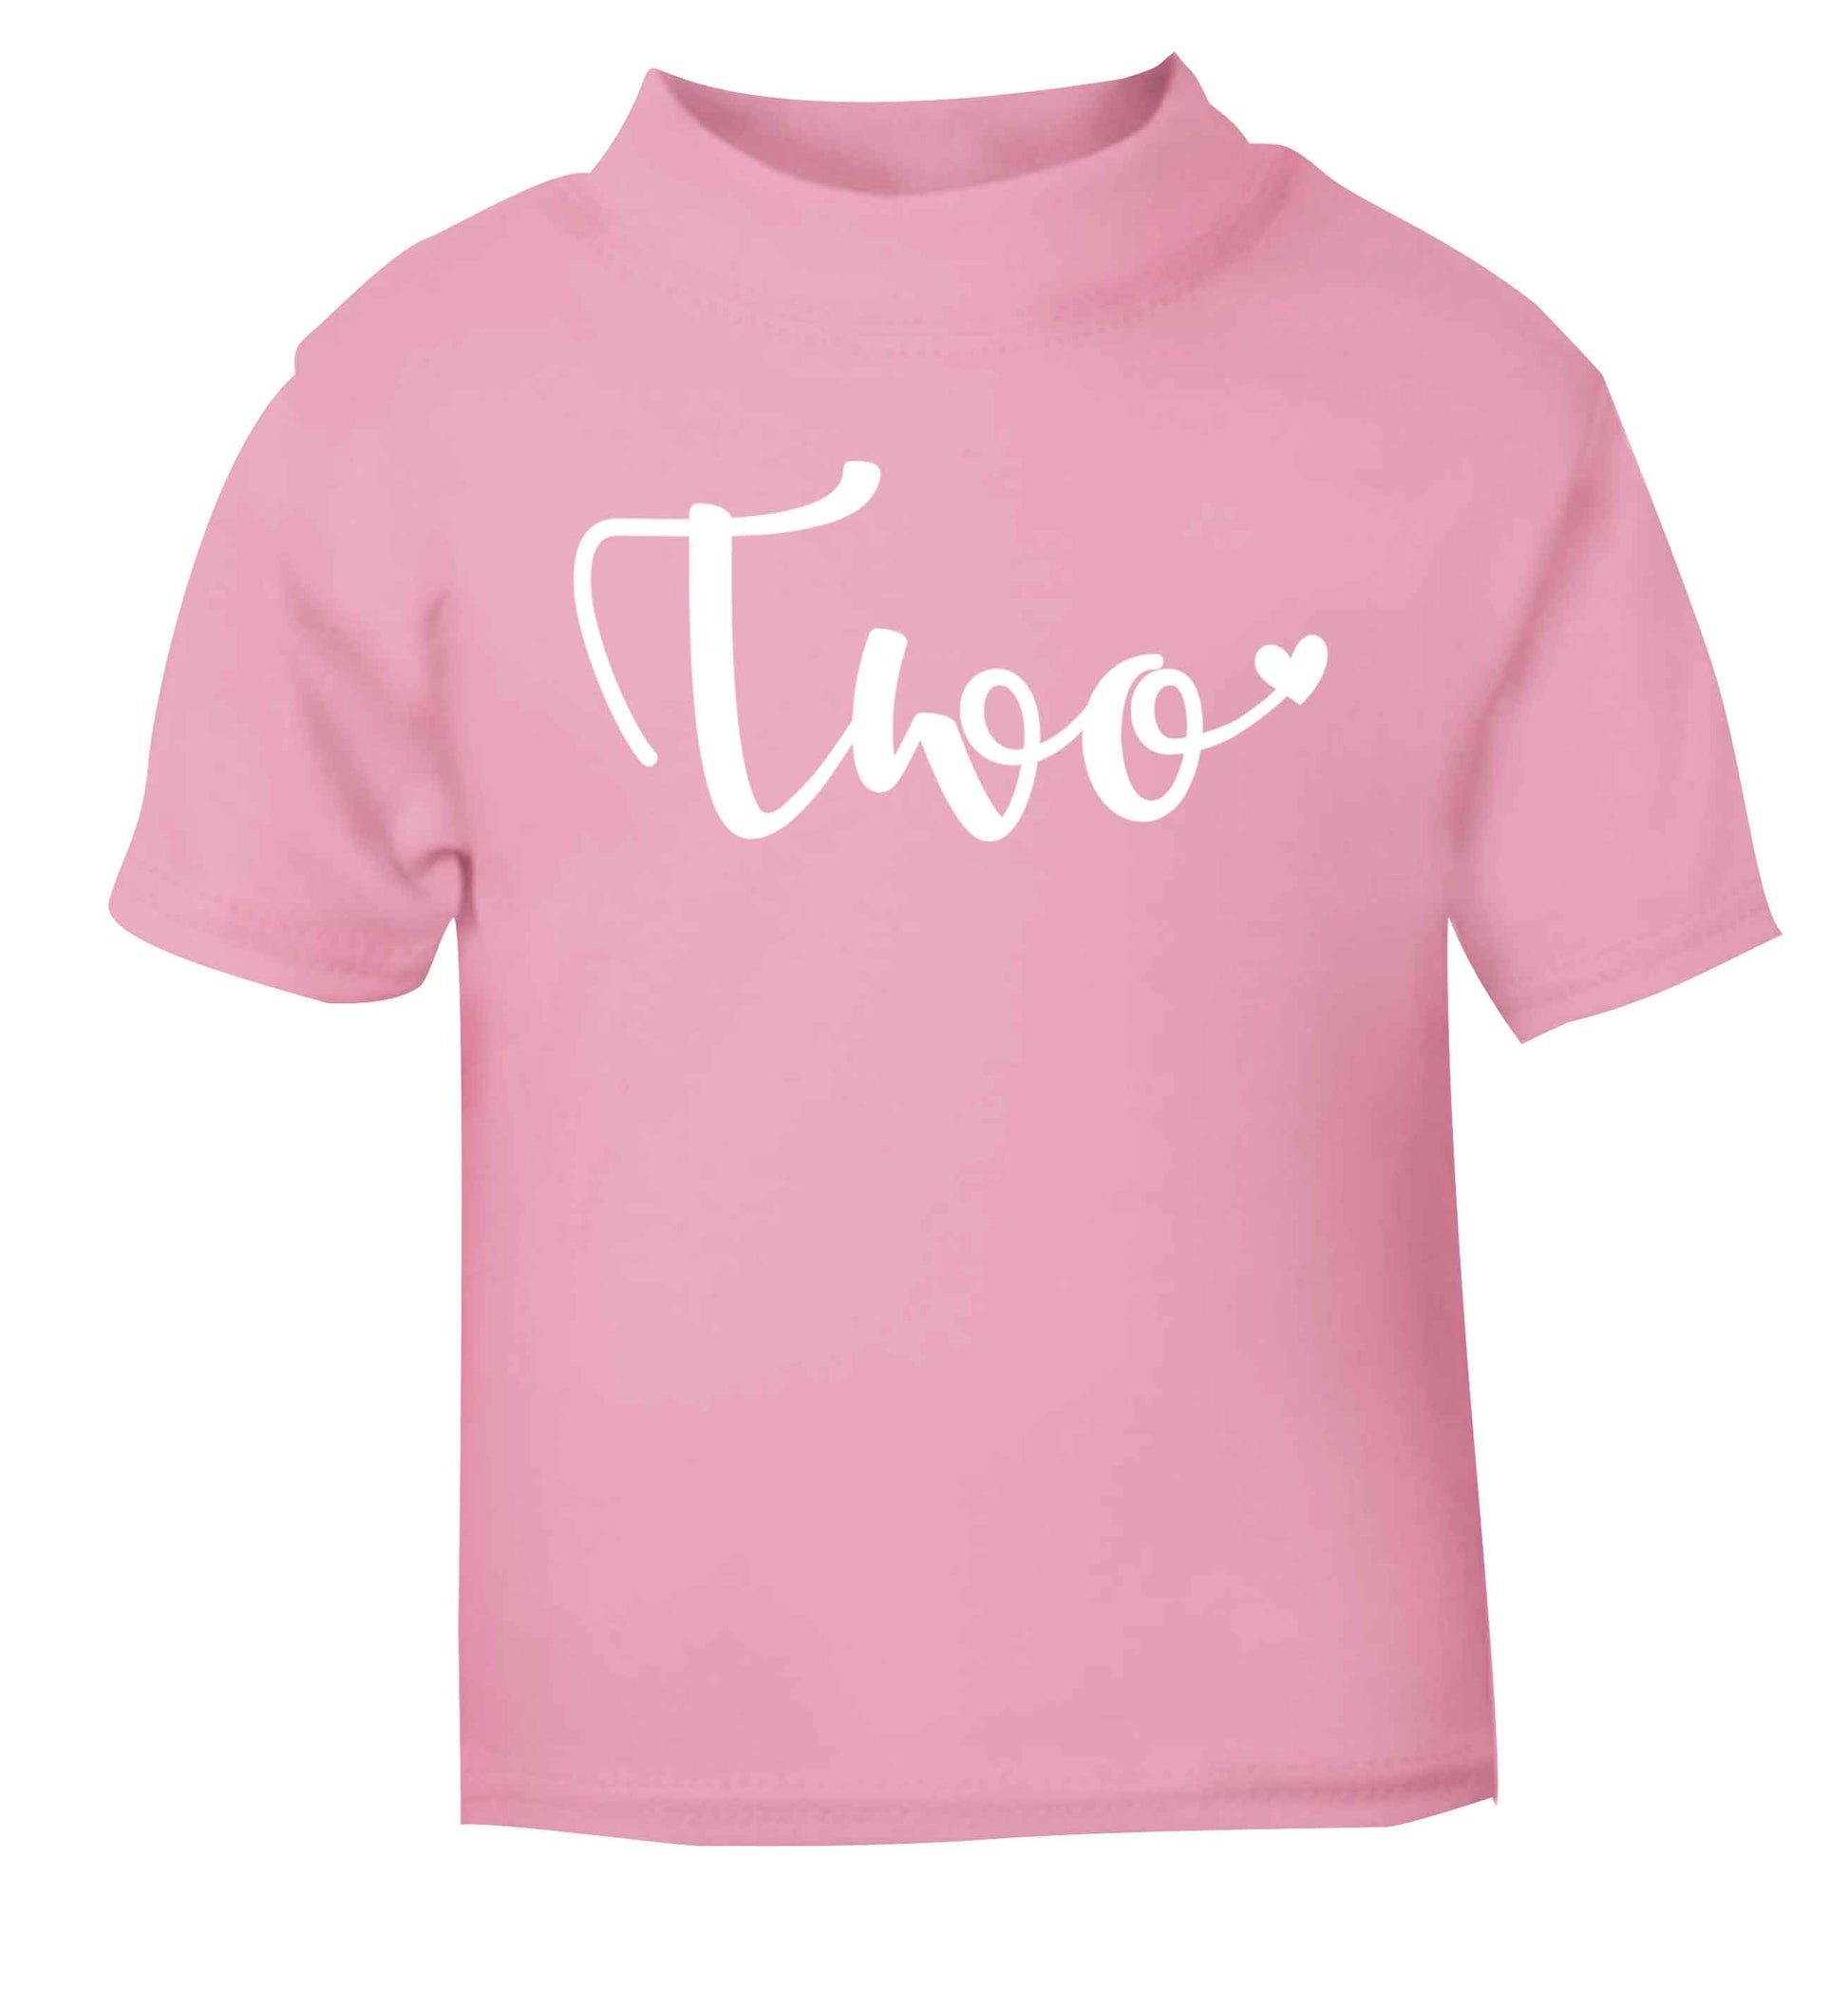 Two and Heart light pink baby toddler Tshirt 2 Years